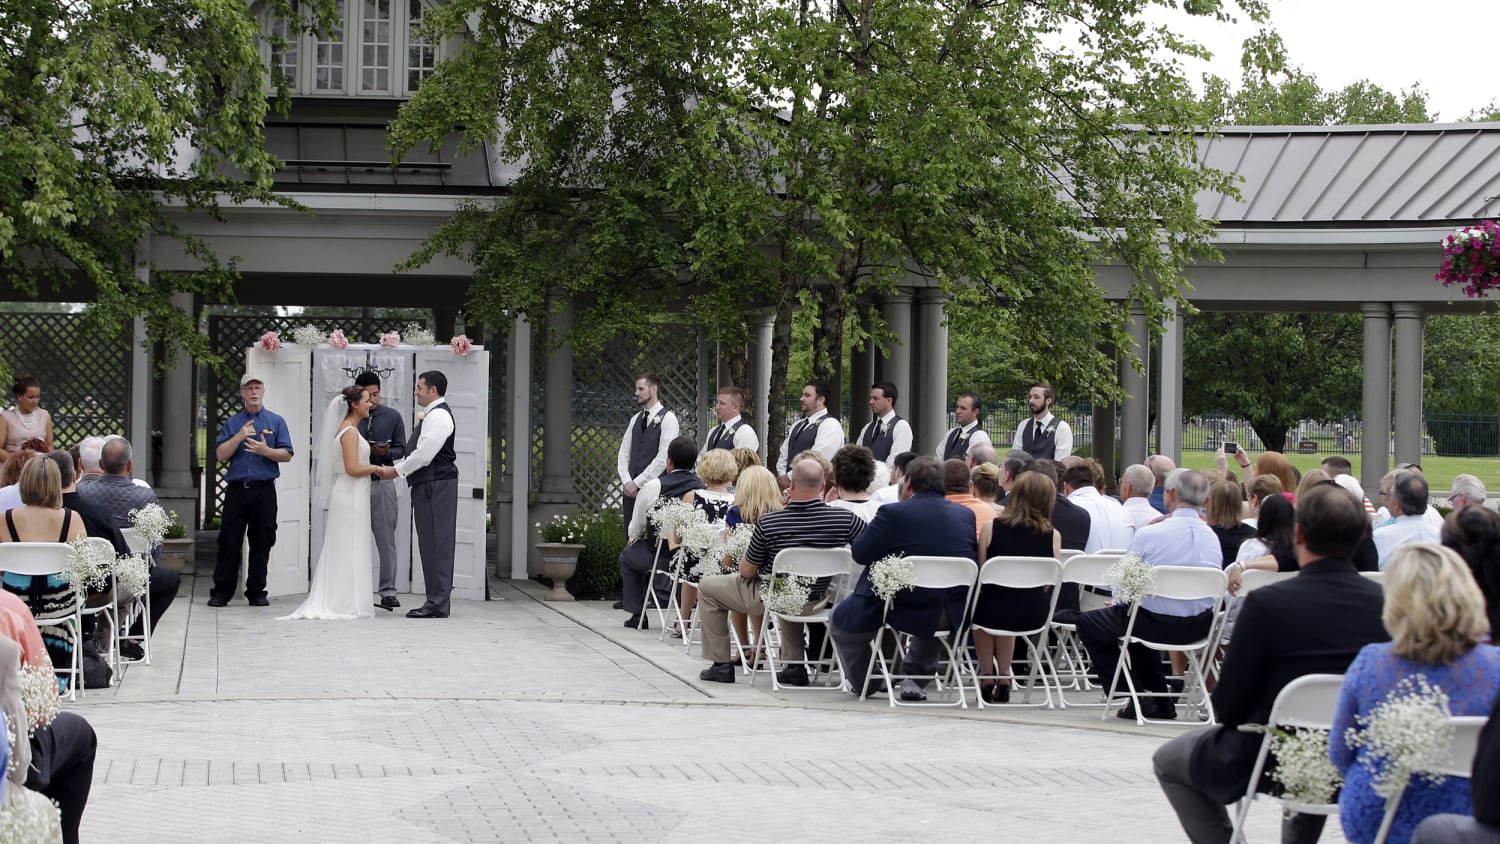 Getting married at a funeral home? More couples say ‘I do’ to new wedding trend ...